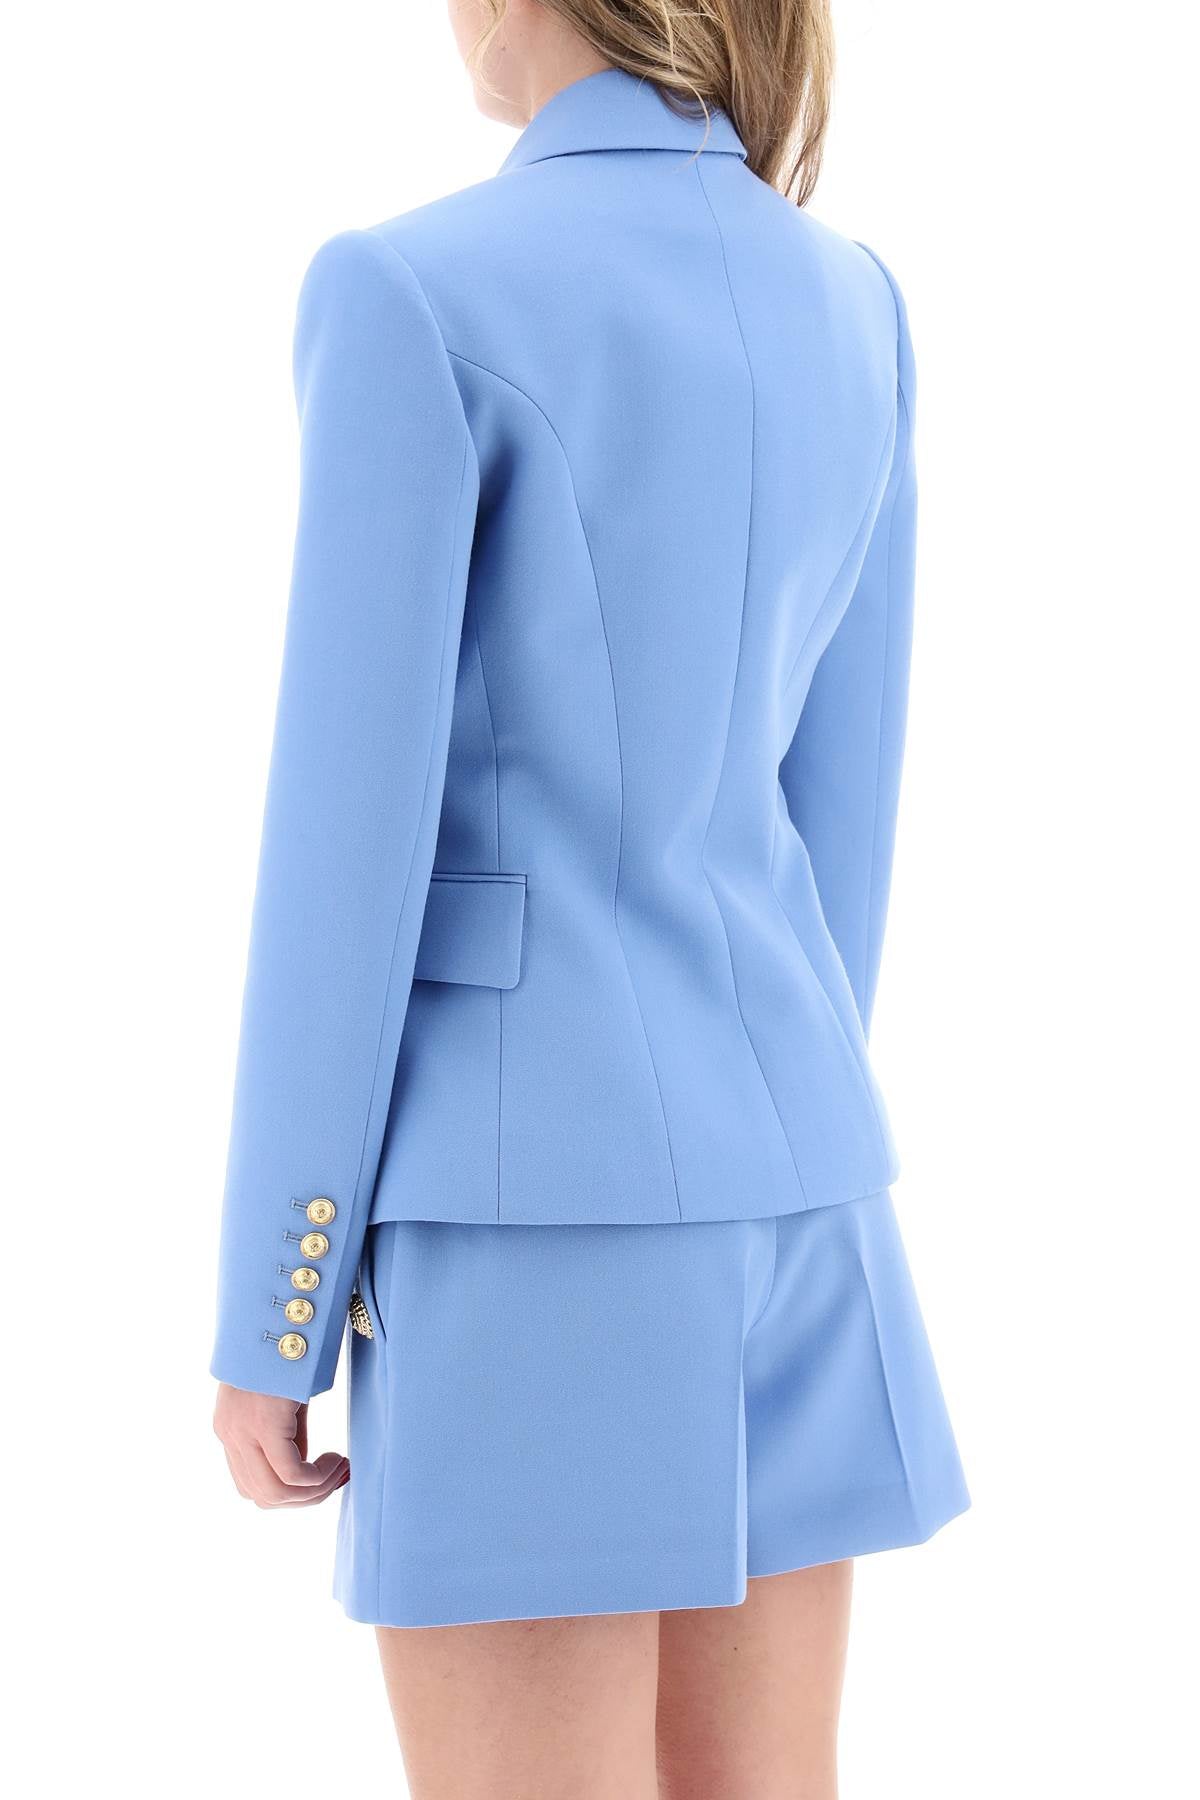 BALMAIN Women's Light Blue Fitted Double-Breasted Jacket for SS24